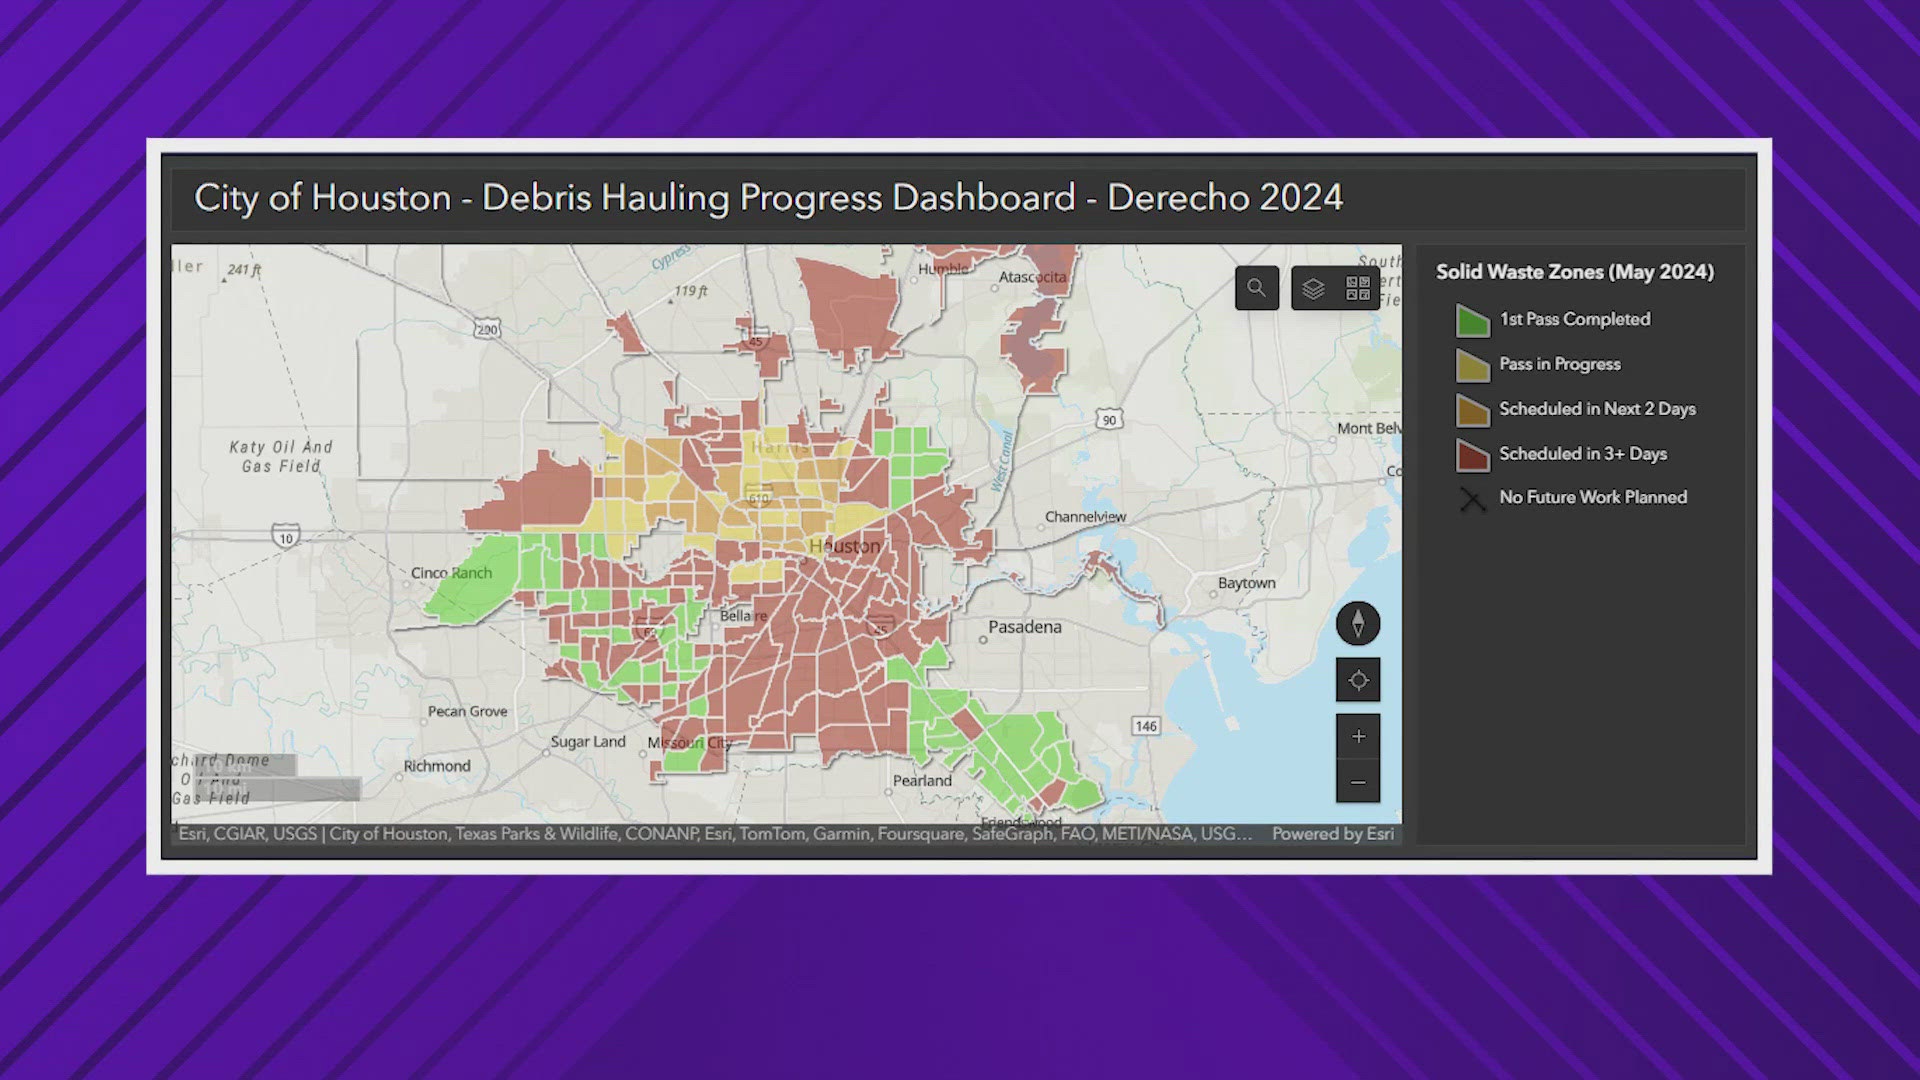 Are you waiting for debris to be picked up following the derecho storm earlier this month?  The City of Houston launched a map where you can track pickups.